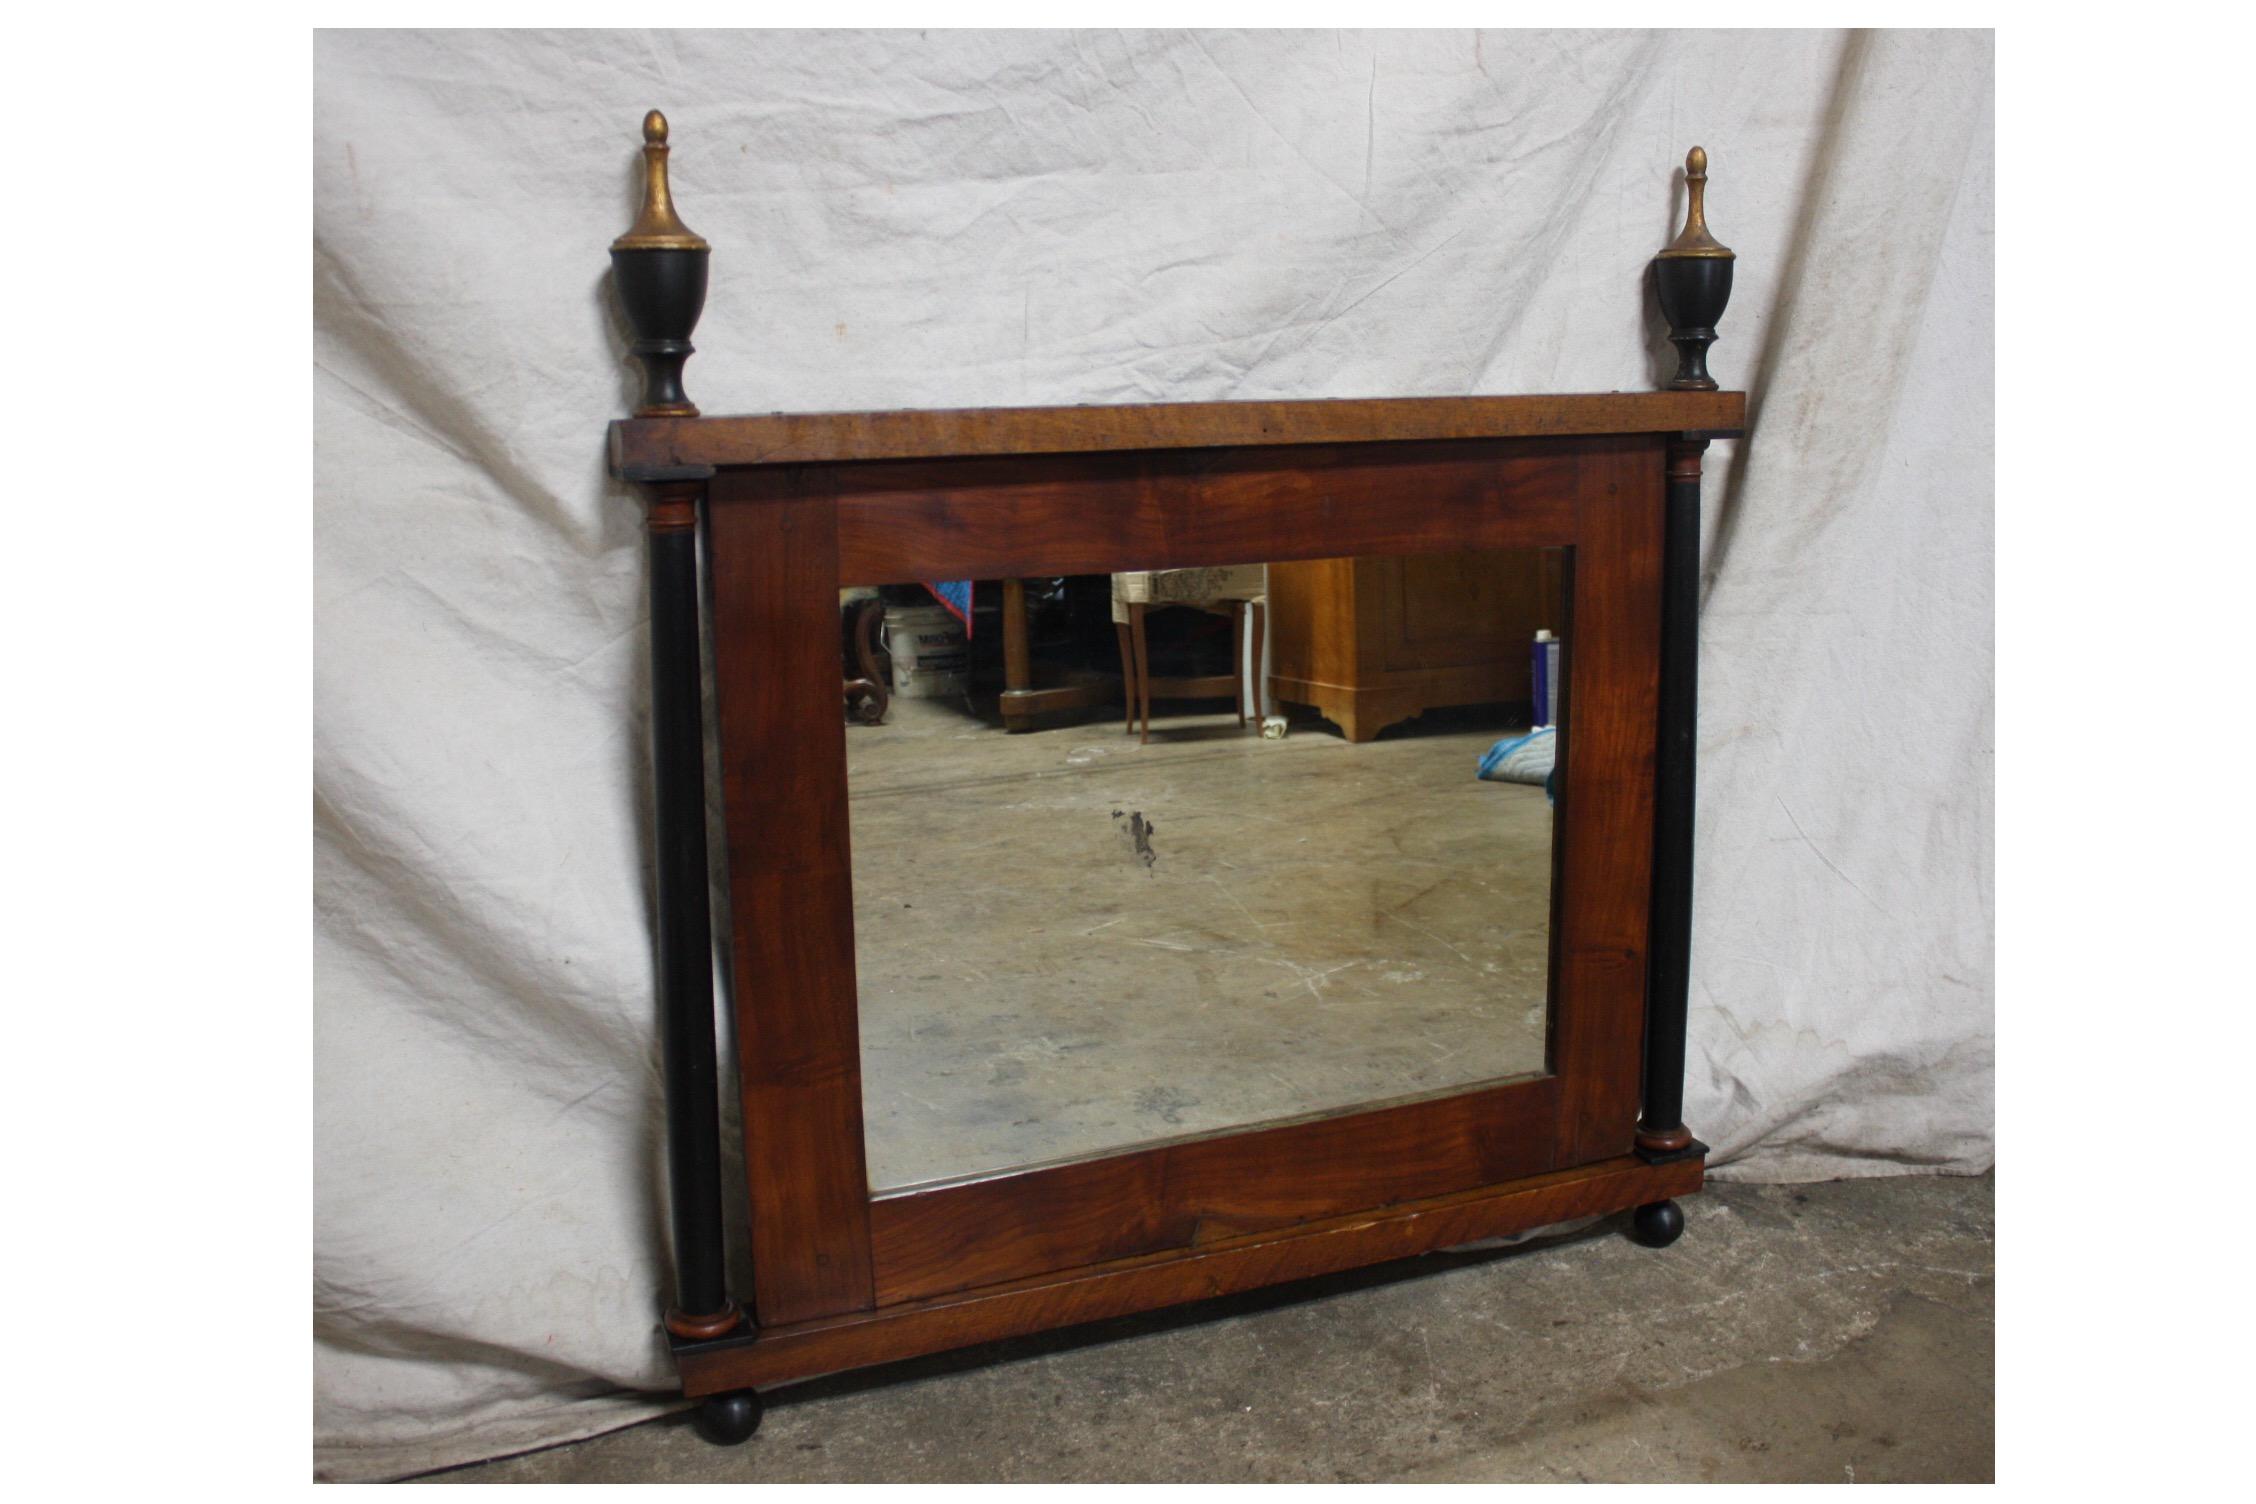 Early 19th Century French Empire Period Mirror In Good Condition For Sale In Stockbridge, GA